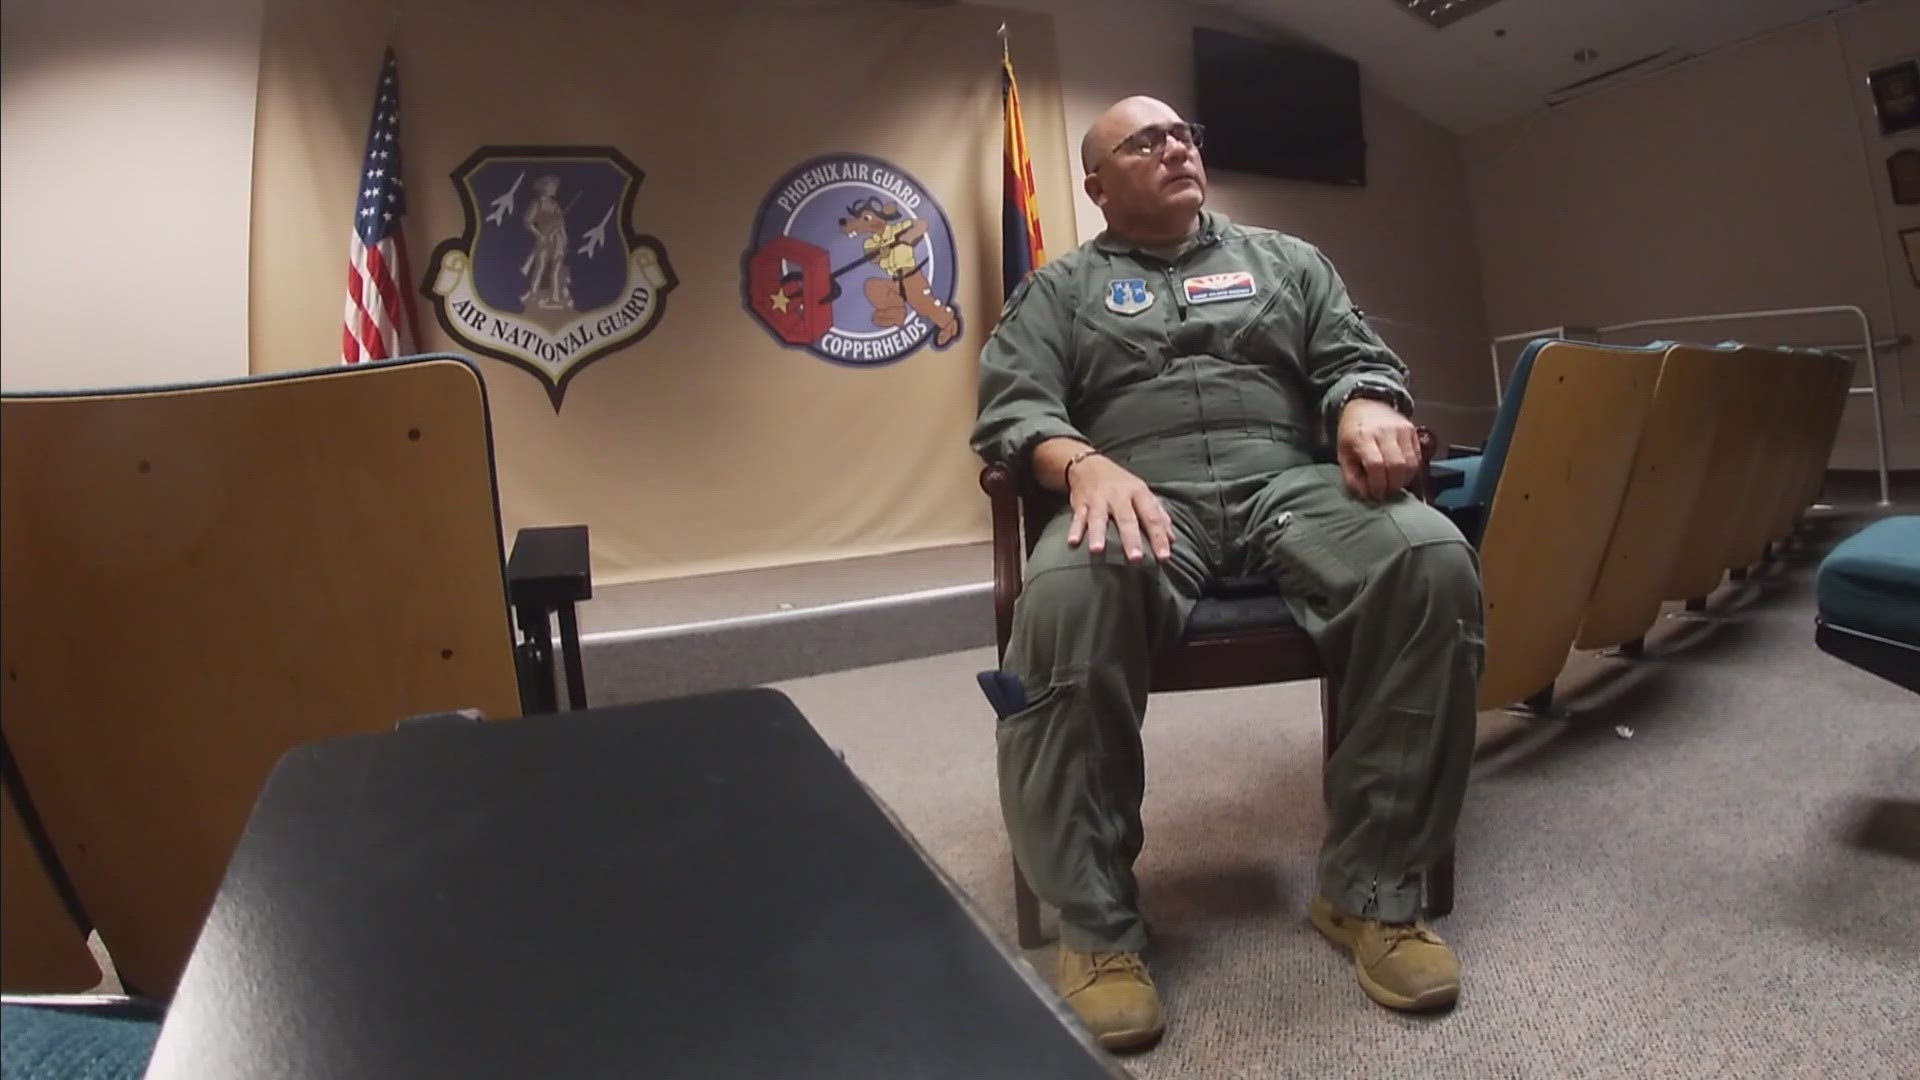 Hilario Sanchez shares what it's like to serve his country as a member of the 161st Air Refueling Wing in Phoenix.